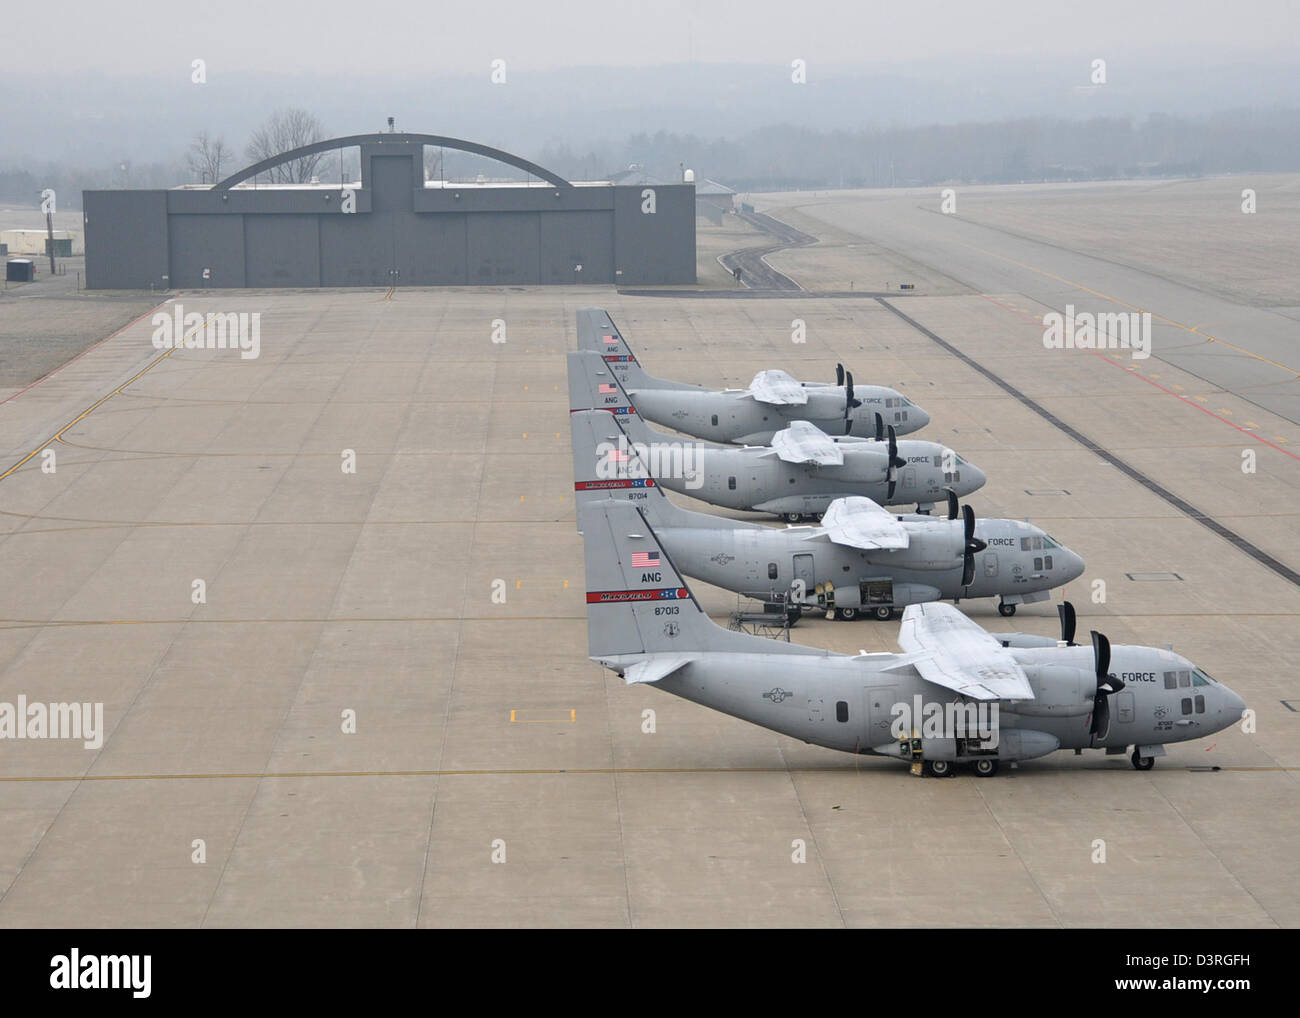 All Four C-27J Spartans belonging to the 179th Airlift Wing, Mansfield, OH, Feb. 13, 2013. Stock Photo